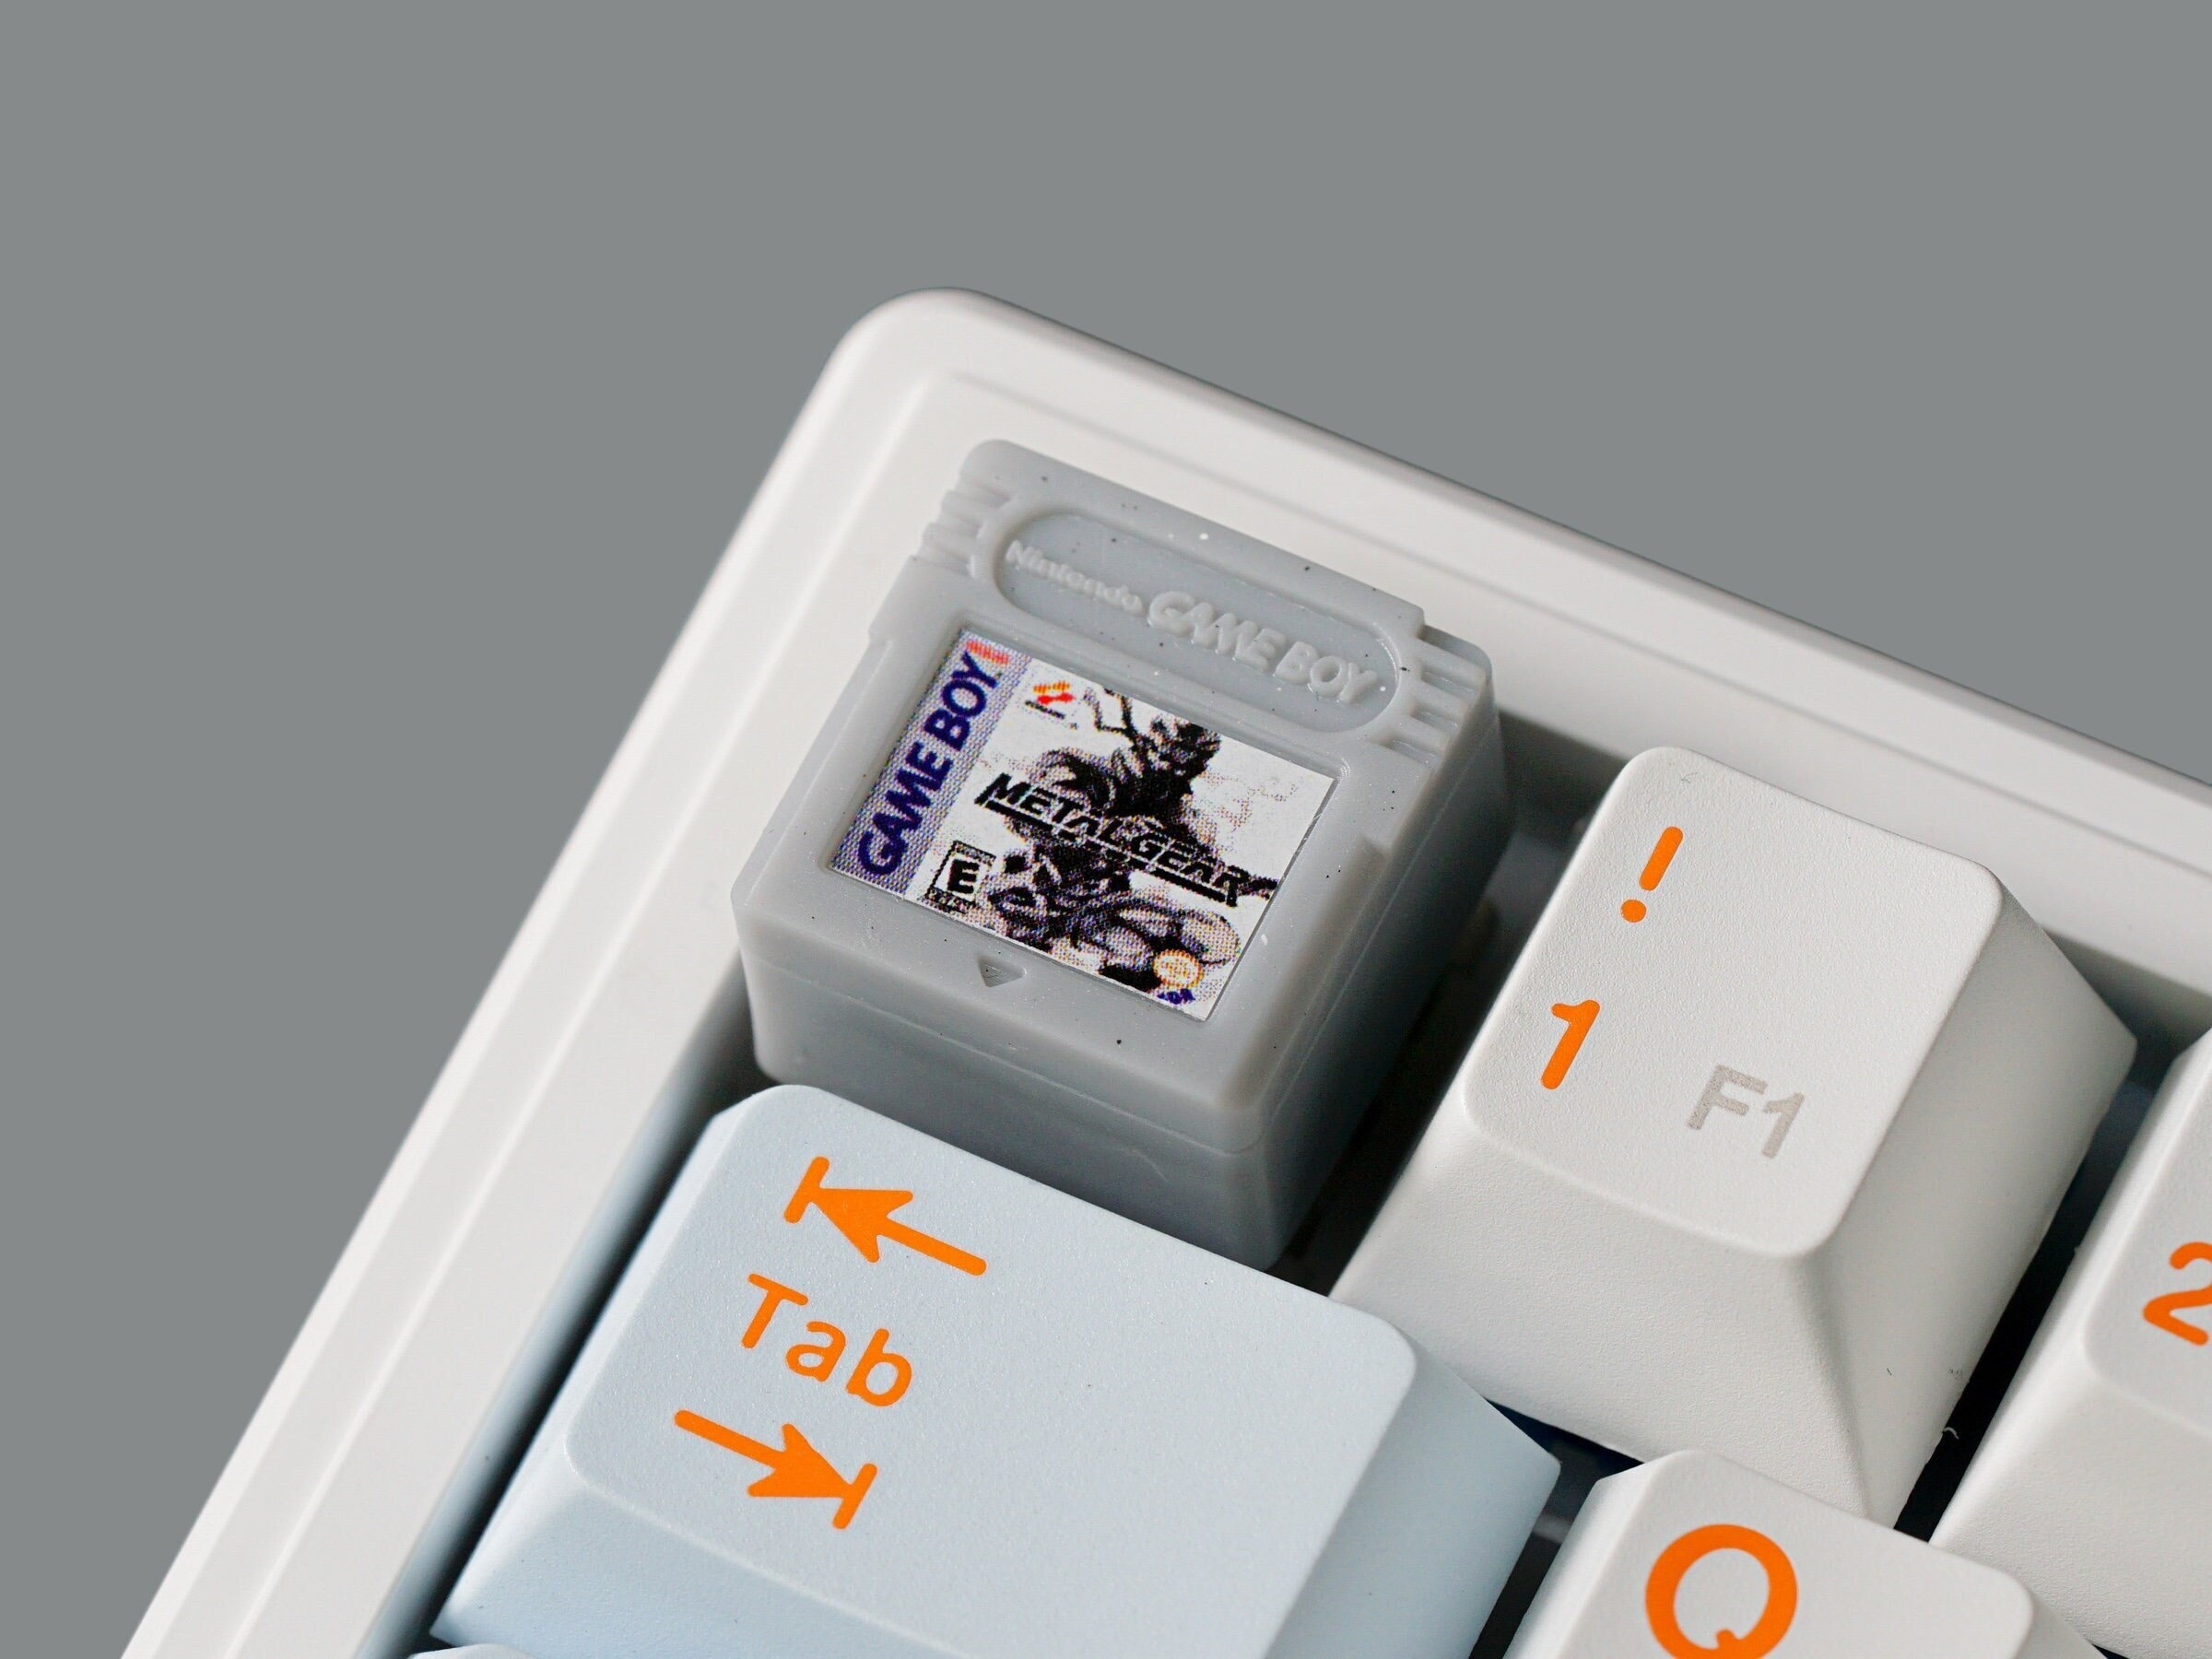 Gameboy Keycap, Metal Gear Gameboy Keycap, Gaming Keycap, Keycap For Cherry MX Switches Mechanical Keyboard, Gift for Him